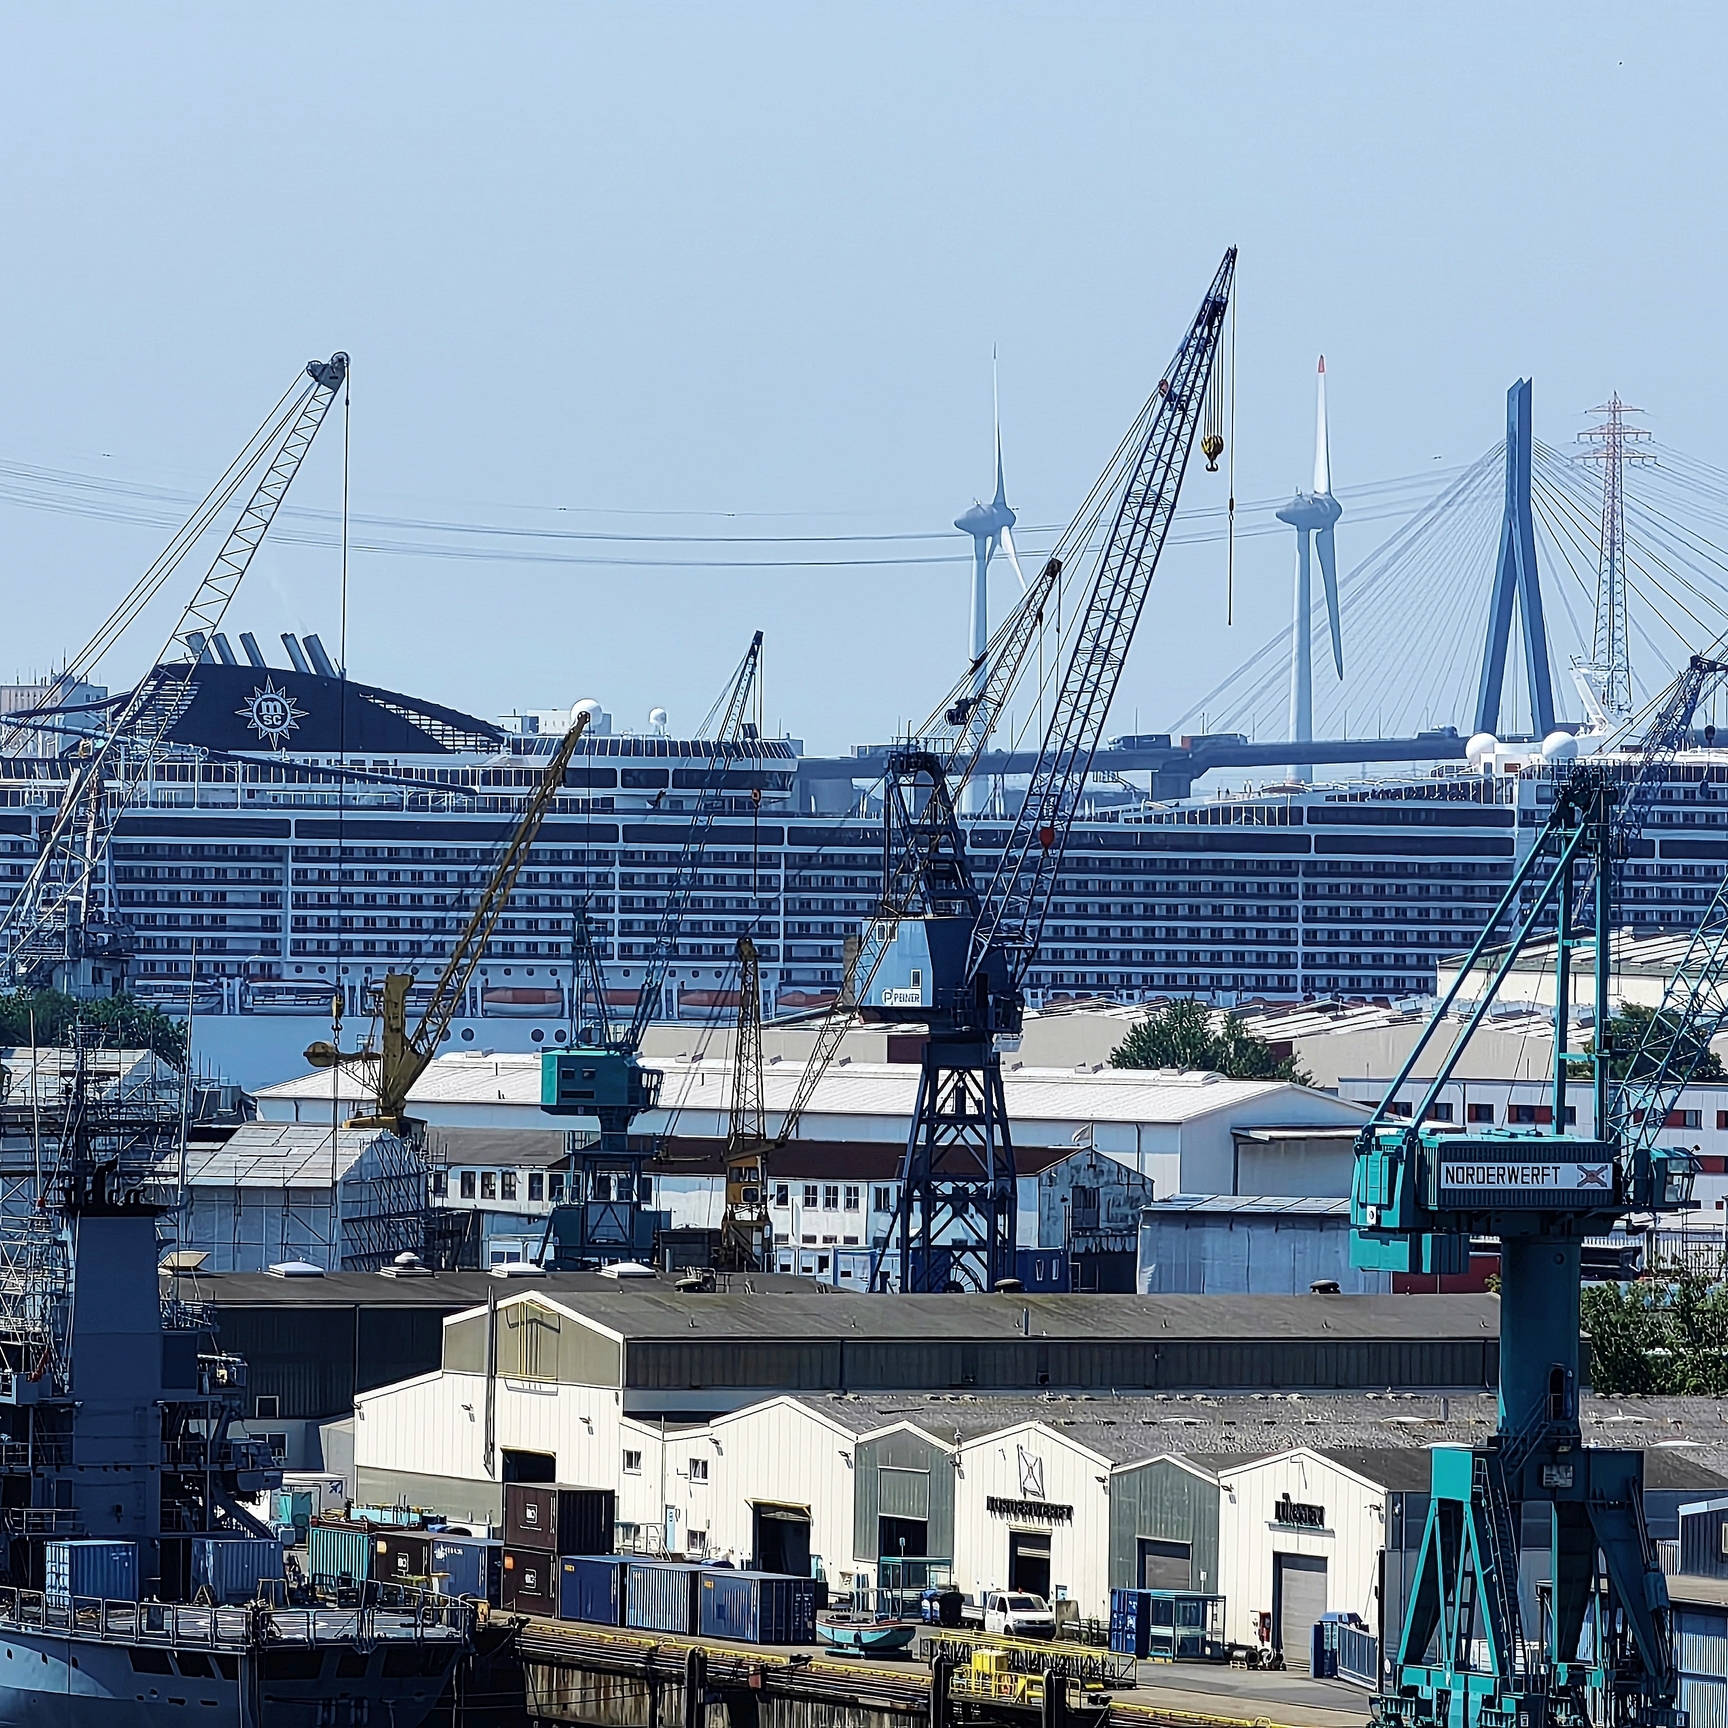 Cruise ship in the industrial port